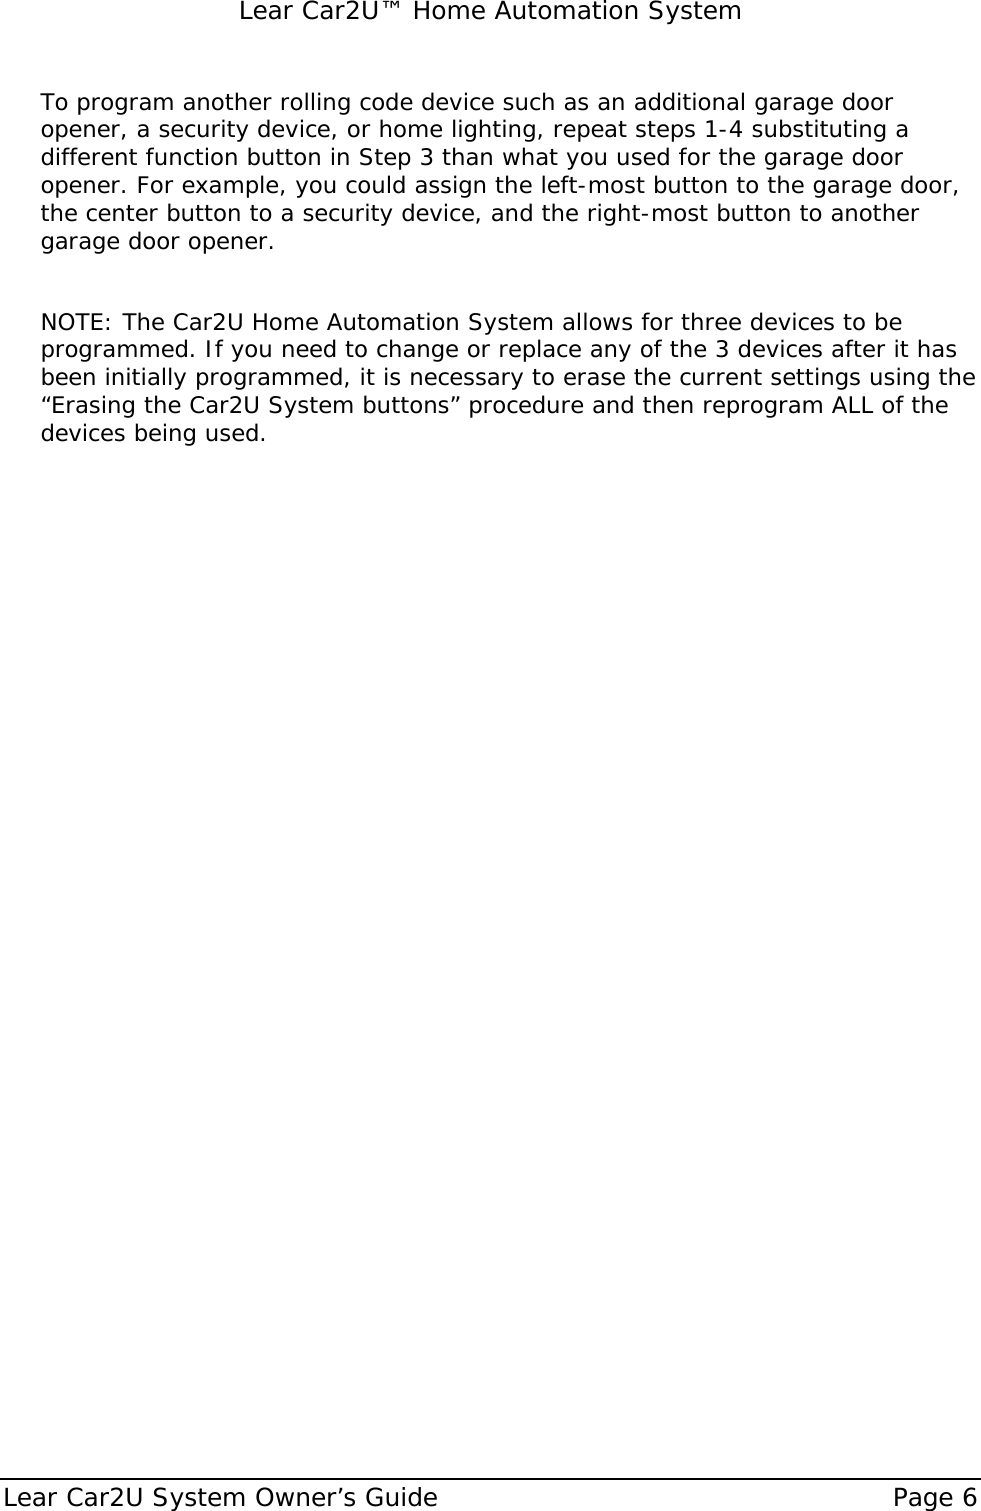   Lear Car2U™ Home Automation System Lear Car2U System Owner’s Guide    Page 6   To program another rolling code device such as an additional garage door opener, a security device, or home lighting, repeat steps 1-4 substituting a different function button in Step 3 than what you used for the garage door opener. For example, you could assign the left-most button to the garage door, the center button to a security device, and the right-most button to another garage door opener.   NOTE: The Car2U Home Automation System allows for three devices to be programmed. If you need to change or replace any of the 3 devices after it has been initially programmed, it is necessary to erase the current settings using the “Erasing the Car2U System buttons” procedure and then reprogram ALL of the devices being used. 